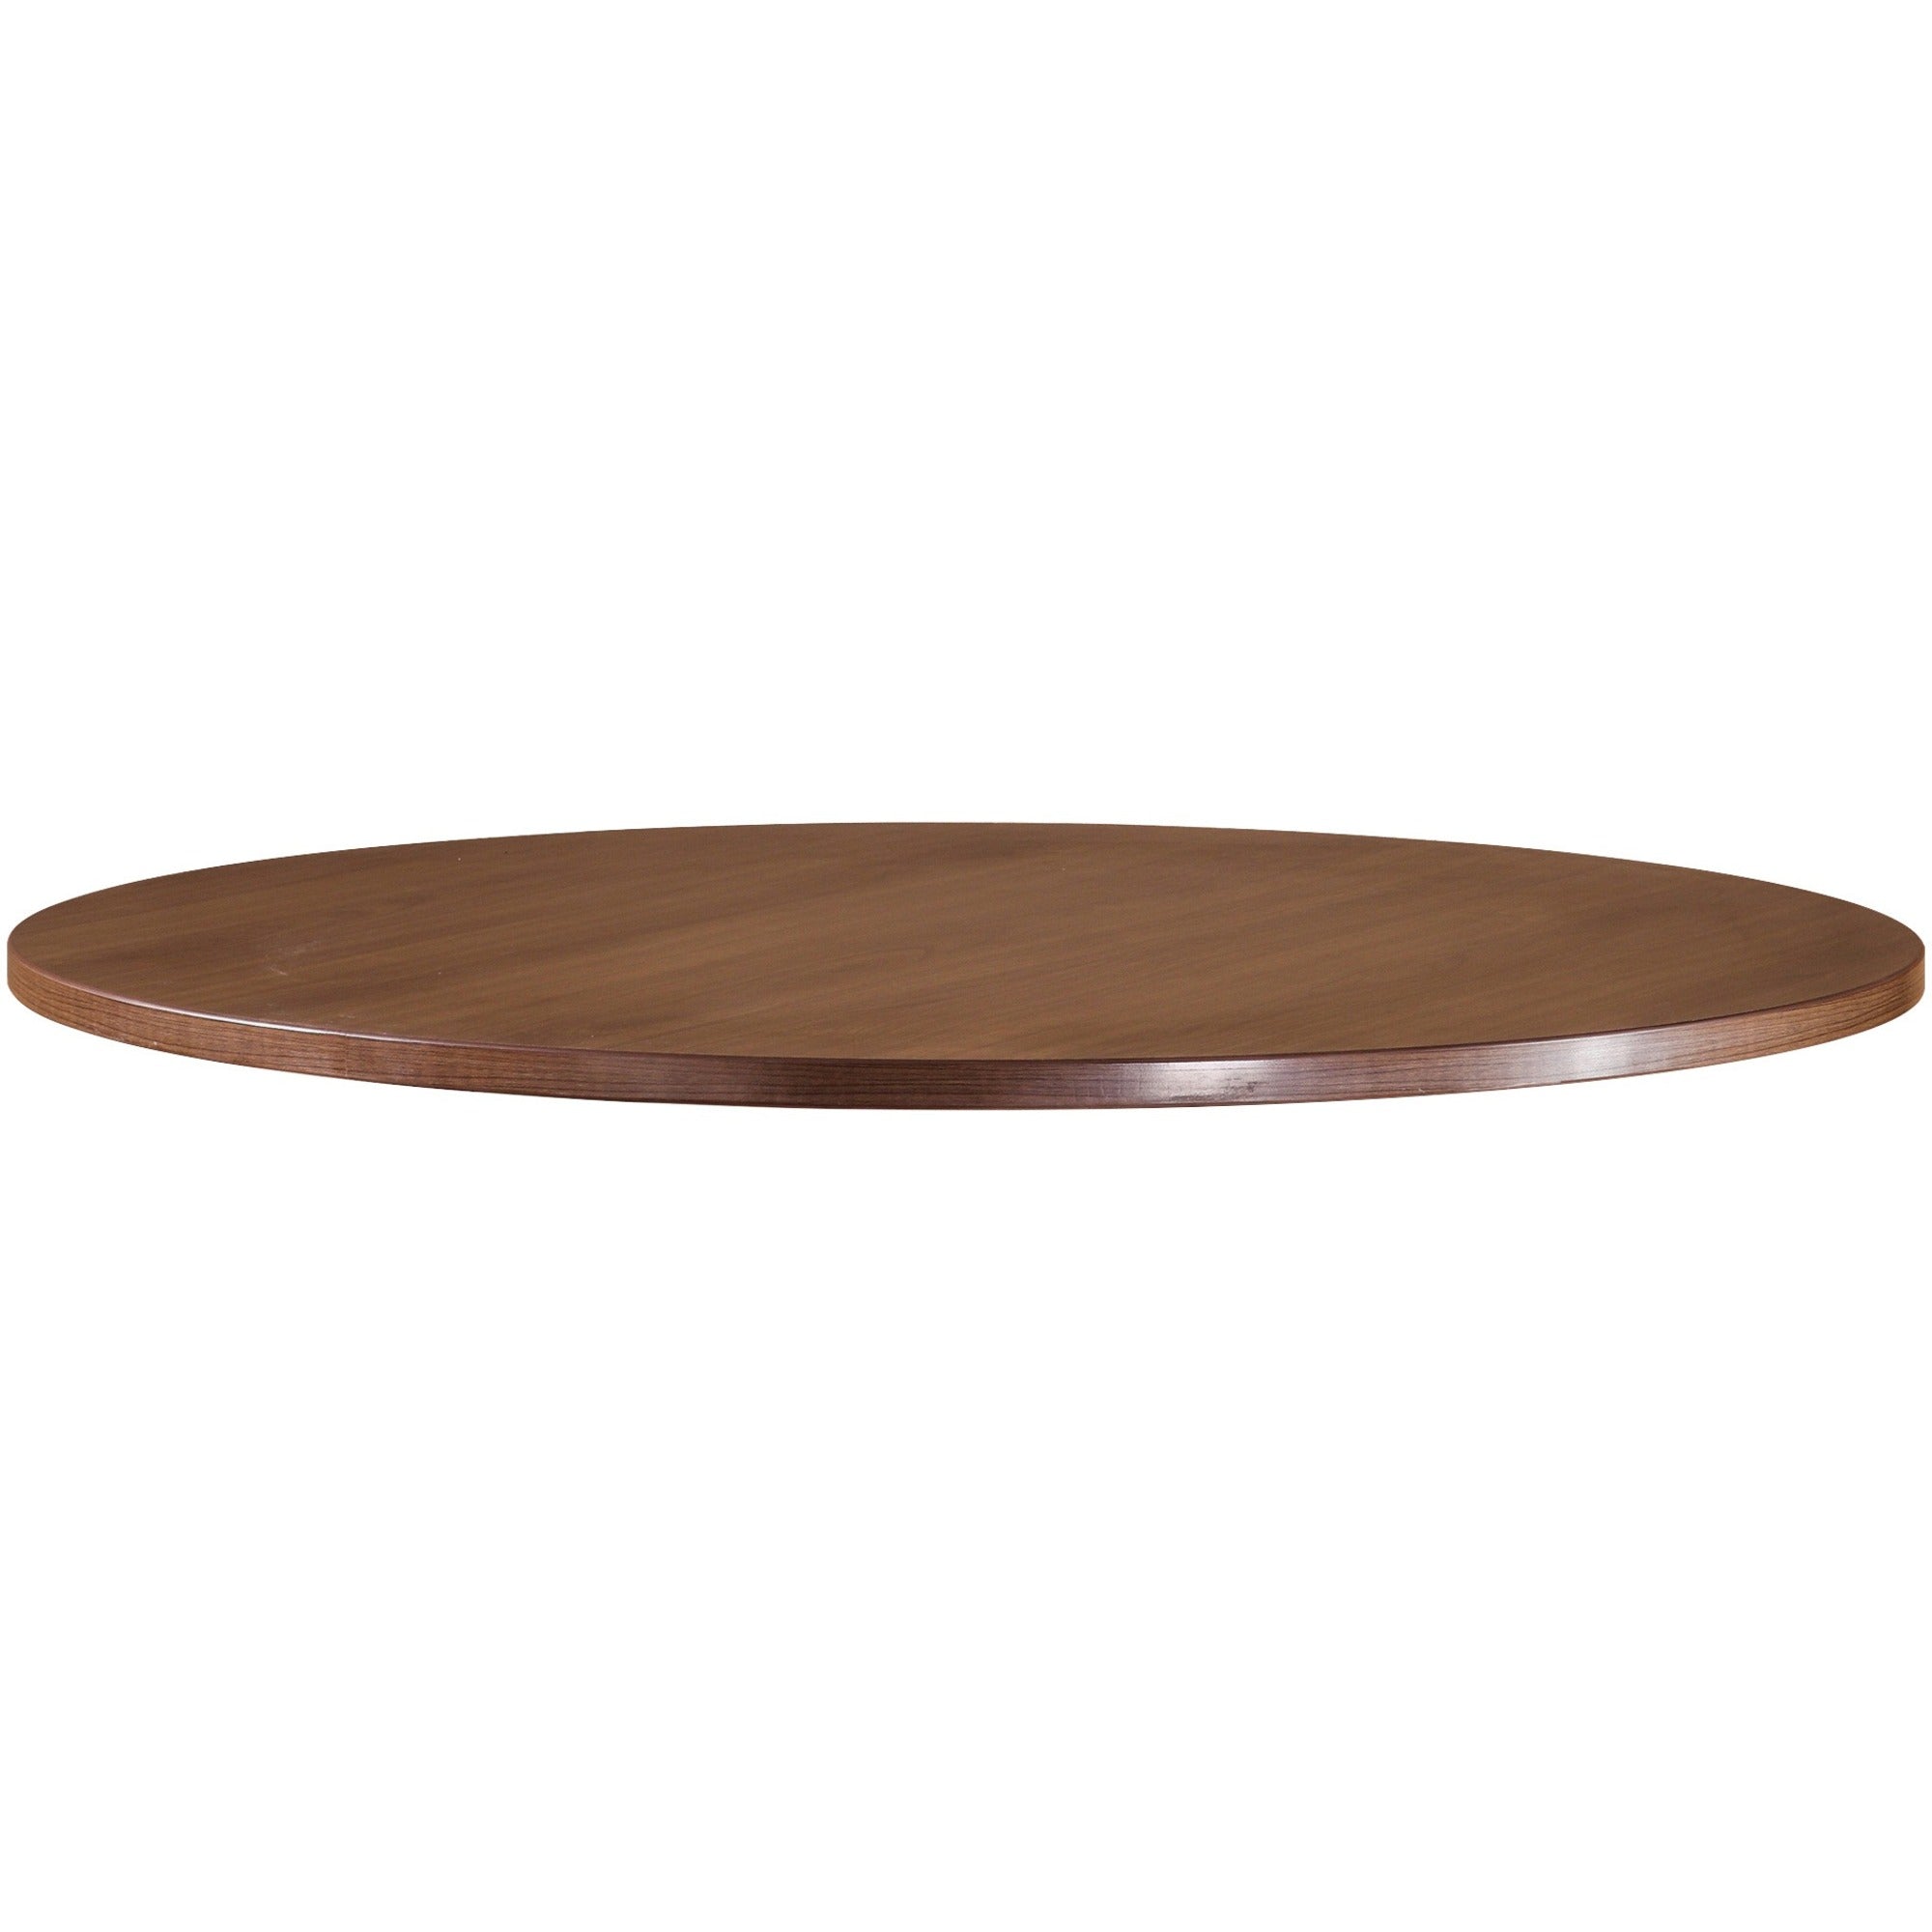 lorell-essentials-conference-tabletop-142-table-top-414-x-4141-band-edge-finish-walnut-laminate-for-meeting-office_llr69990 - 1